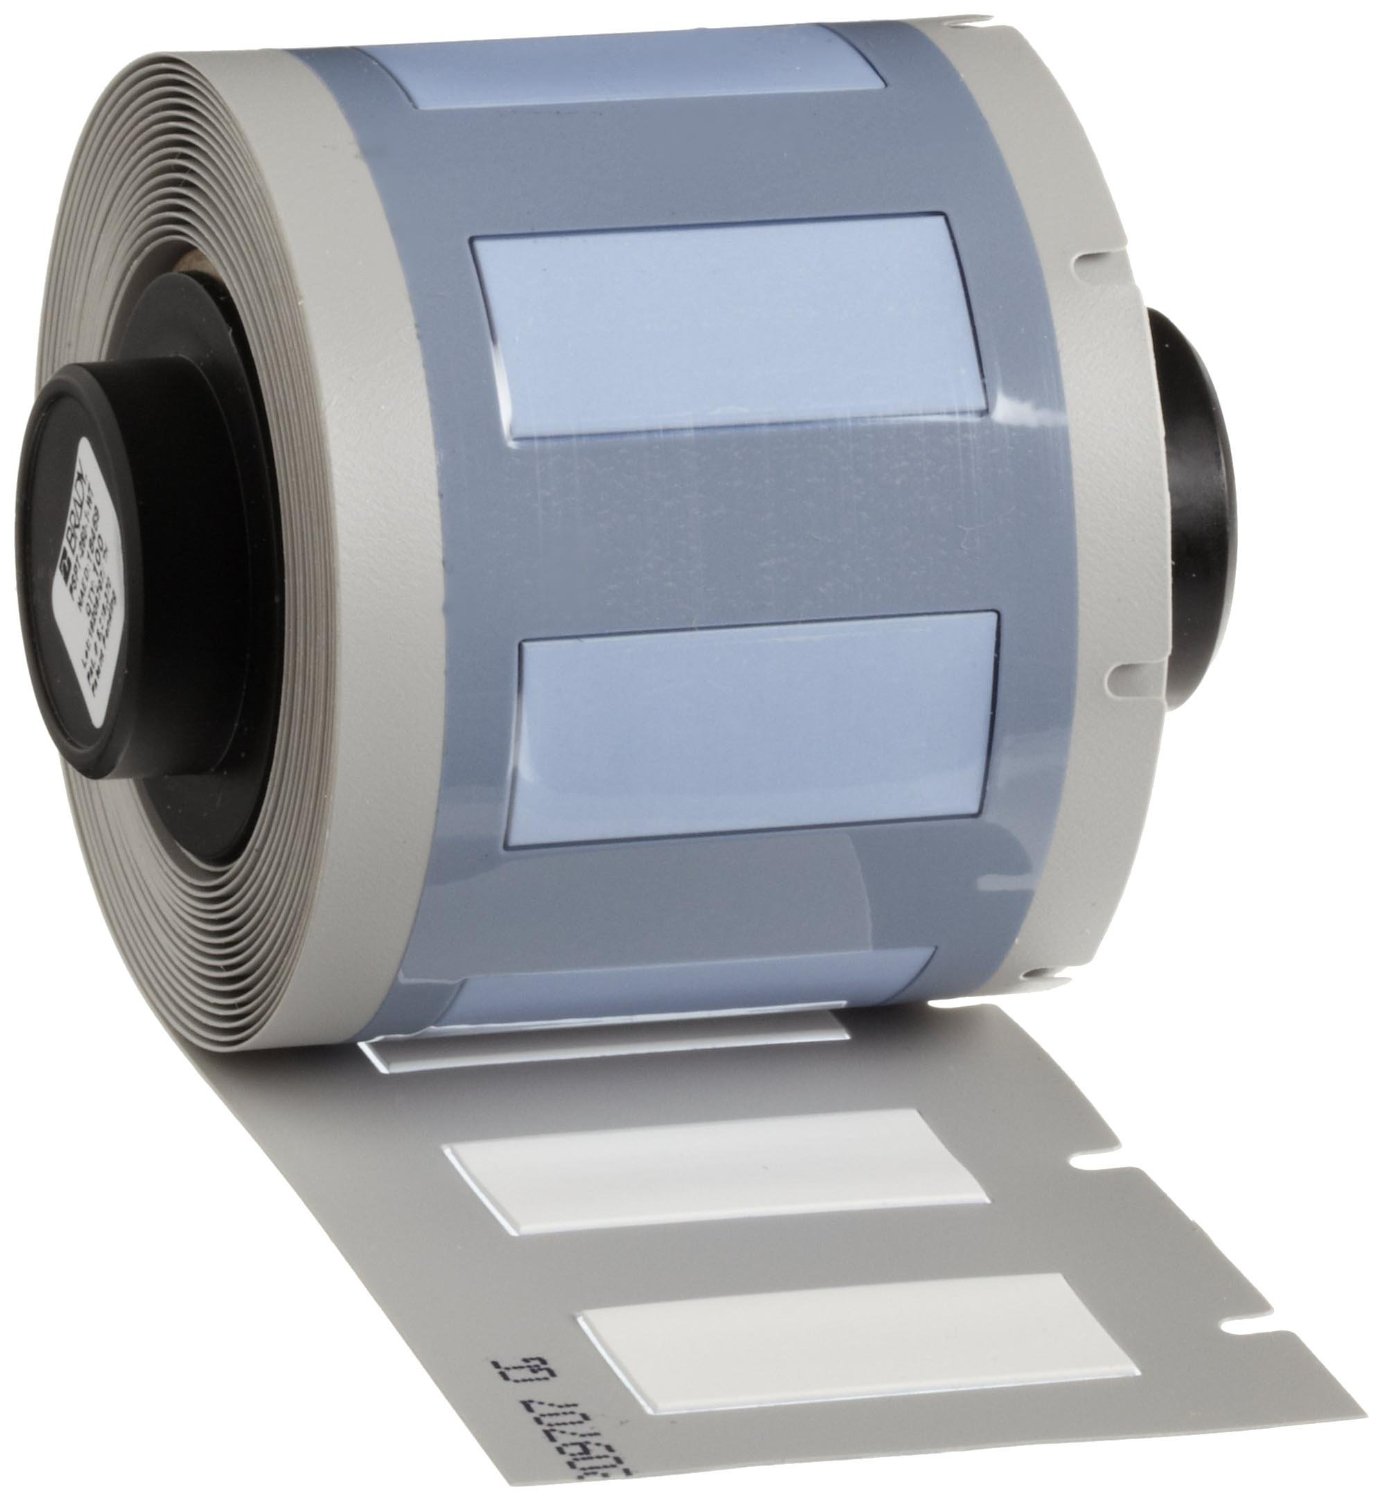 Brady PSPT-250-1-WT TLS 2200 And TLS PC Link PermaSleeve 0.439" Height, 1.015" Width, B-342 Heat-Shrink Polyolefin White Color Wire Marker Sleeves (100 Per Roll)